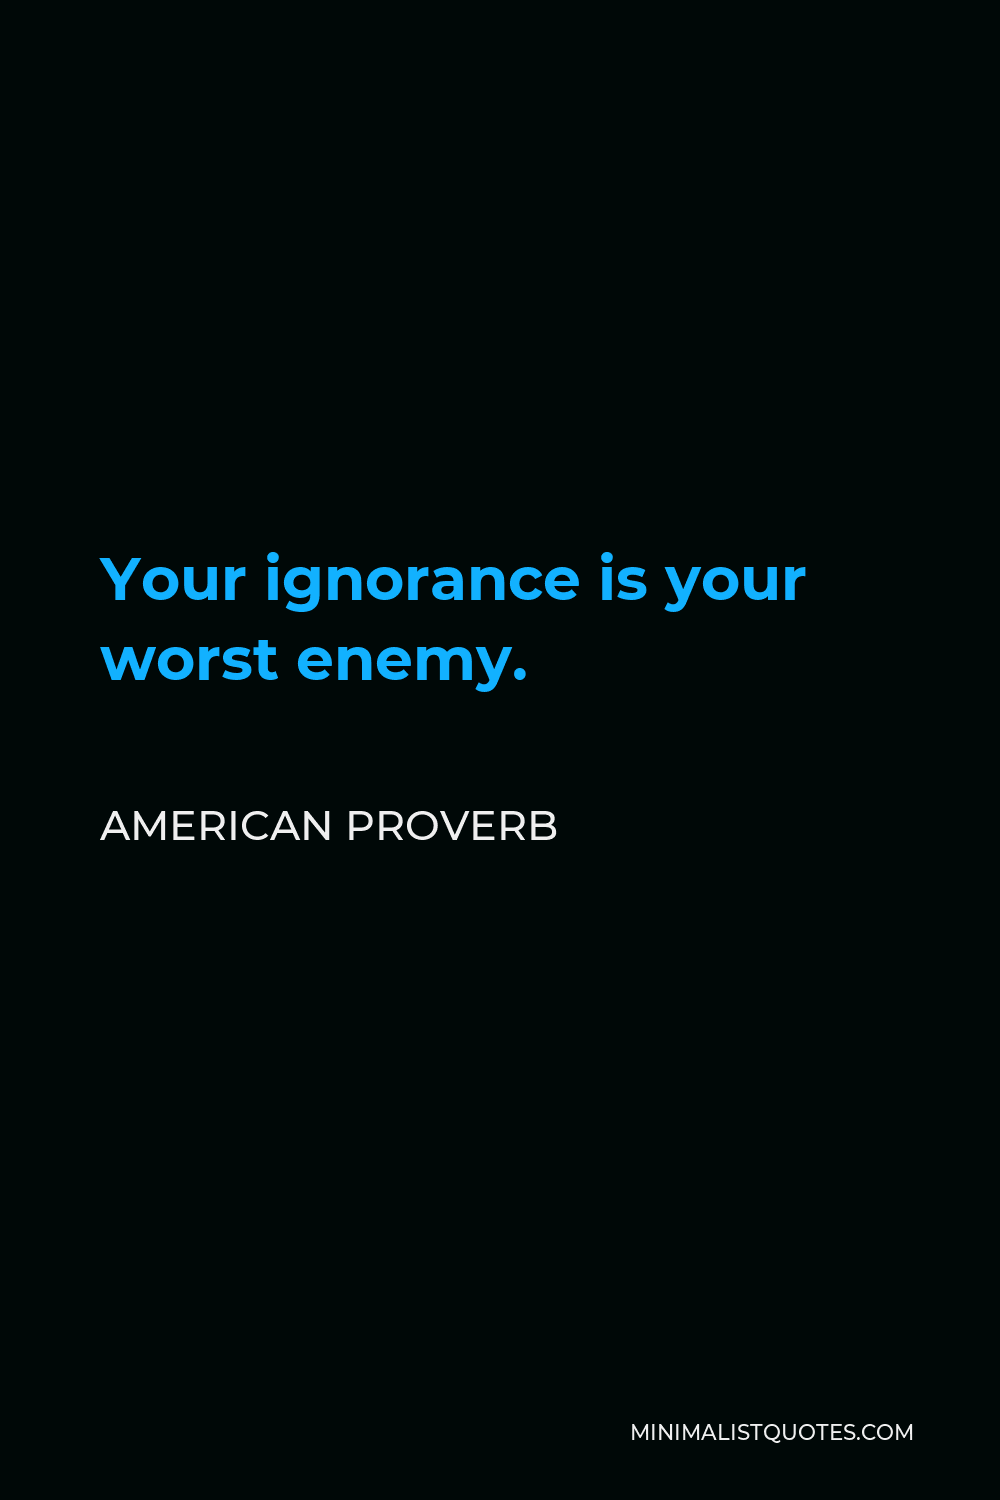 American Proverb Quote - Your ignorance is your worst enemy.